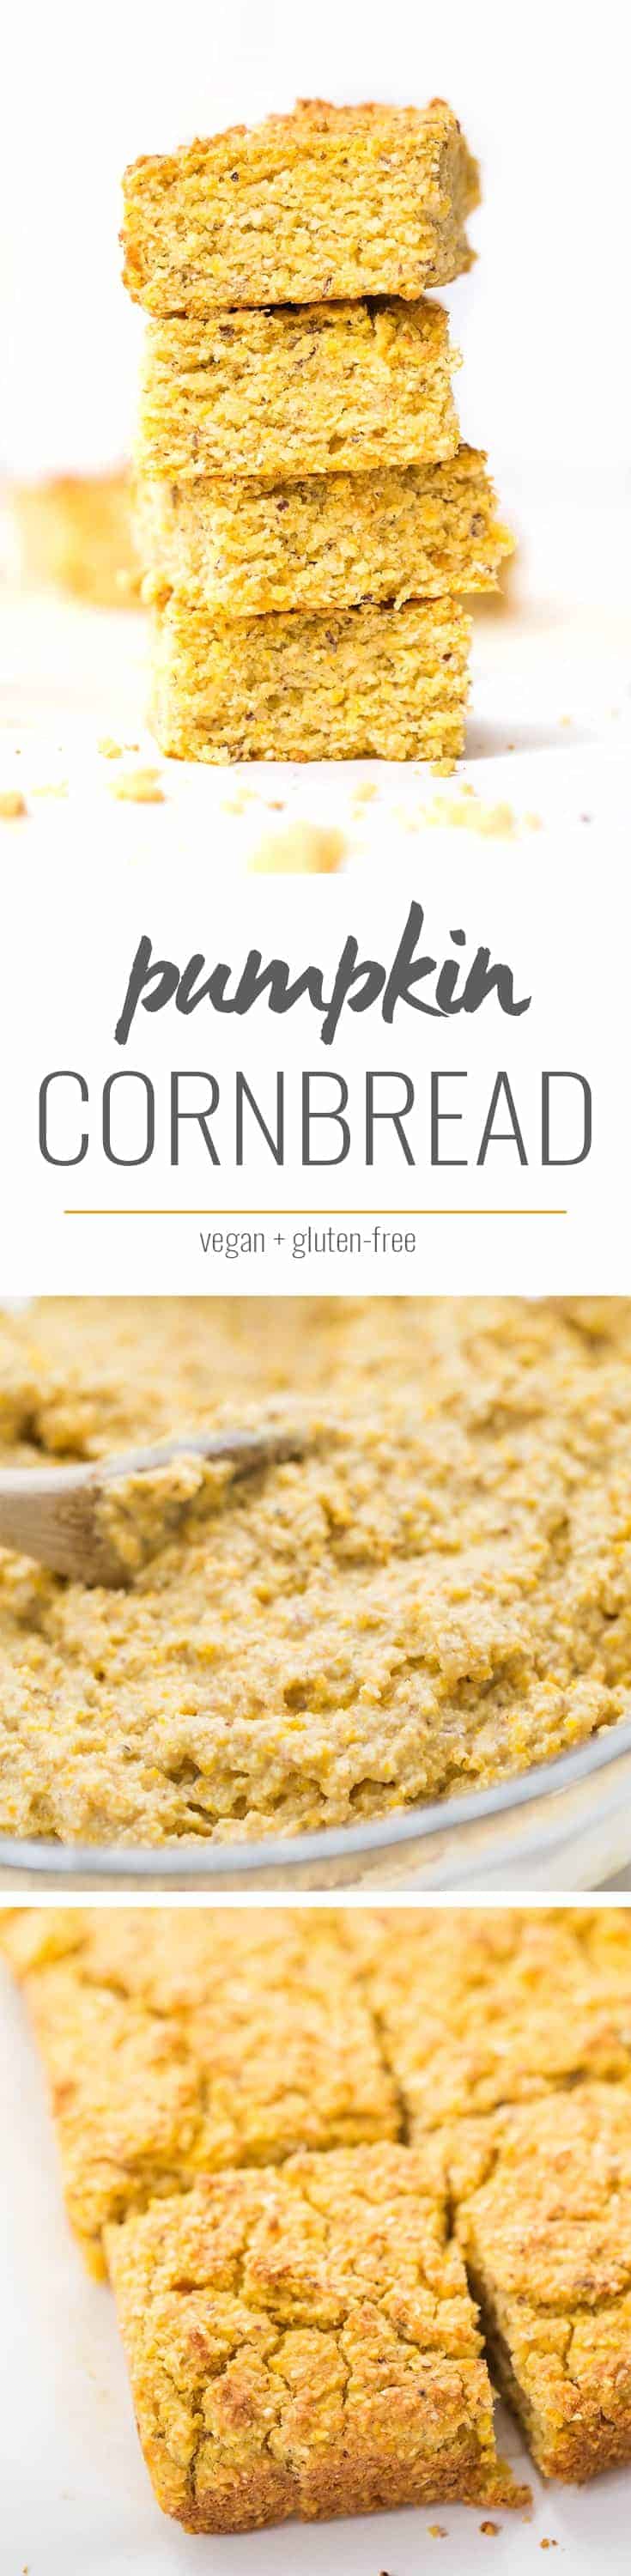 This EASY vegan pumpkin cornbread recipe is made in just one bowl and uses only 10 ingredients!